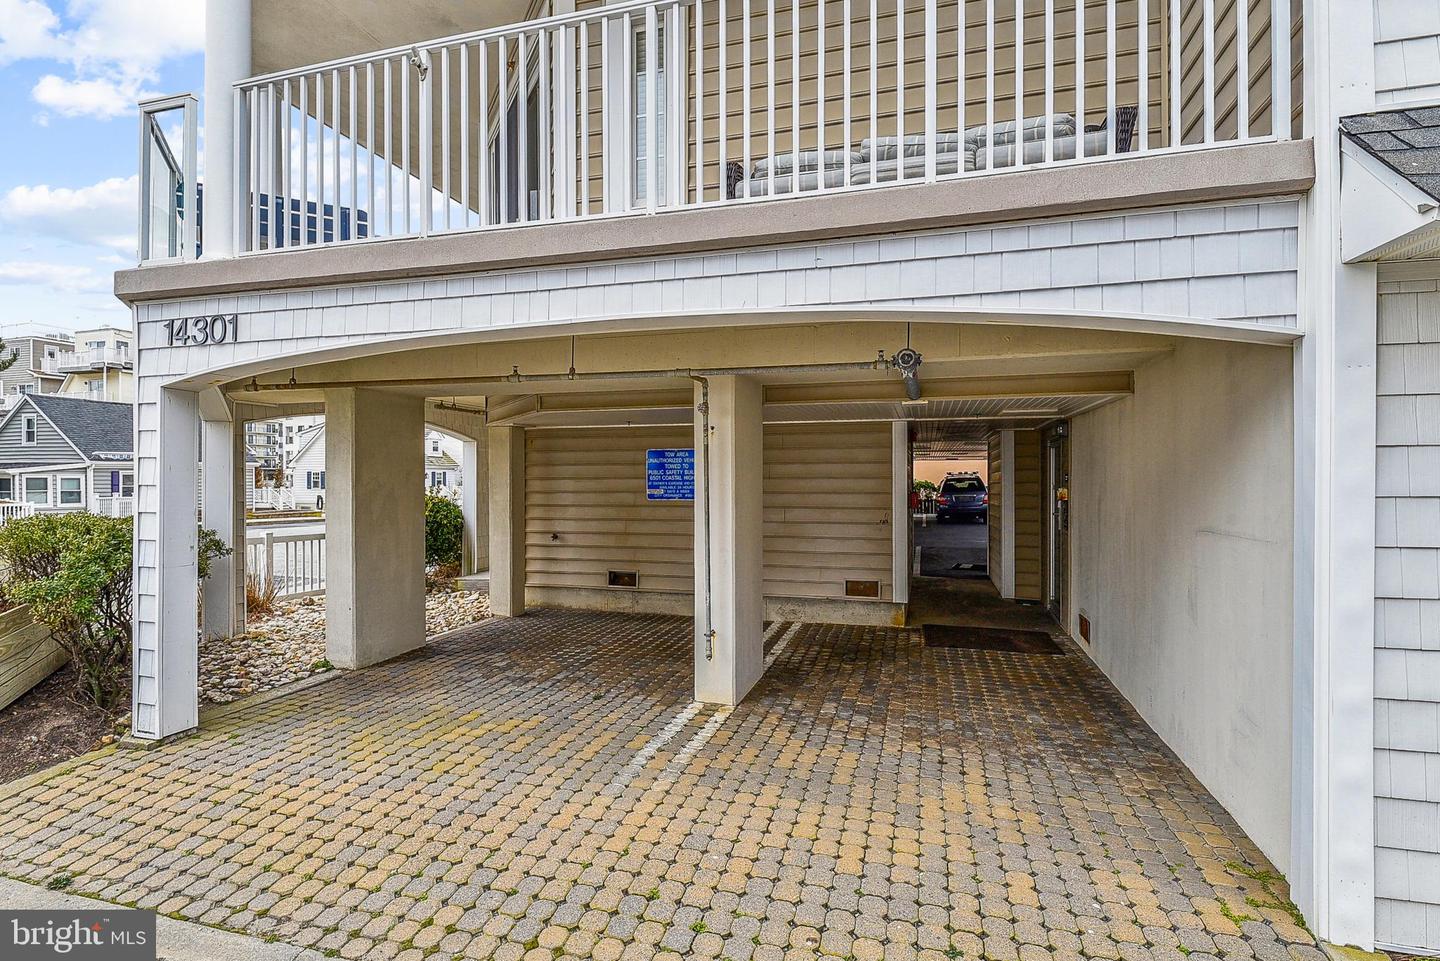 MDWO2019340-802917223814-2024-03-12-11-41-08 14301 Wight St #201 | Ocean City, MD Real Estate For Sale | MLS# Mdwo2019340  - 1st Choice Properties